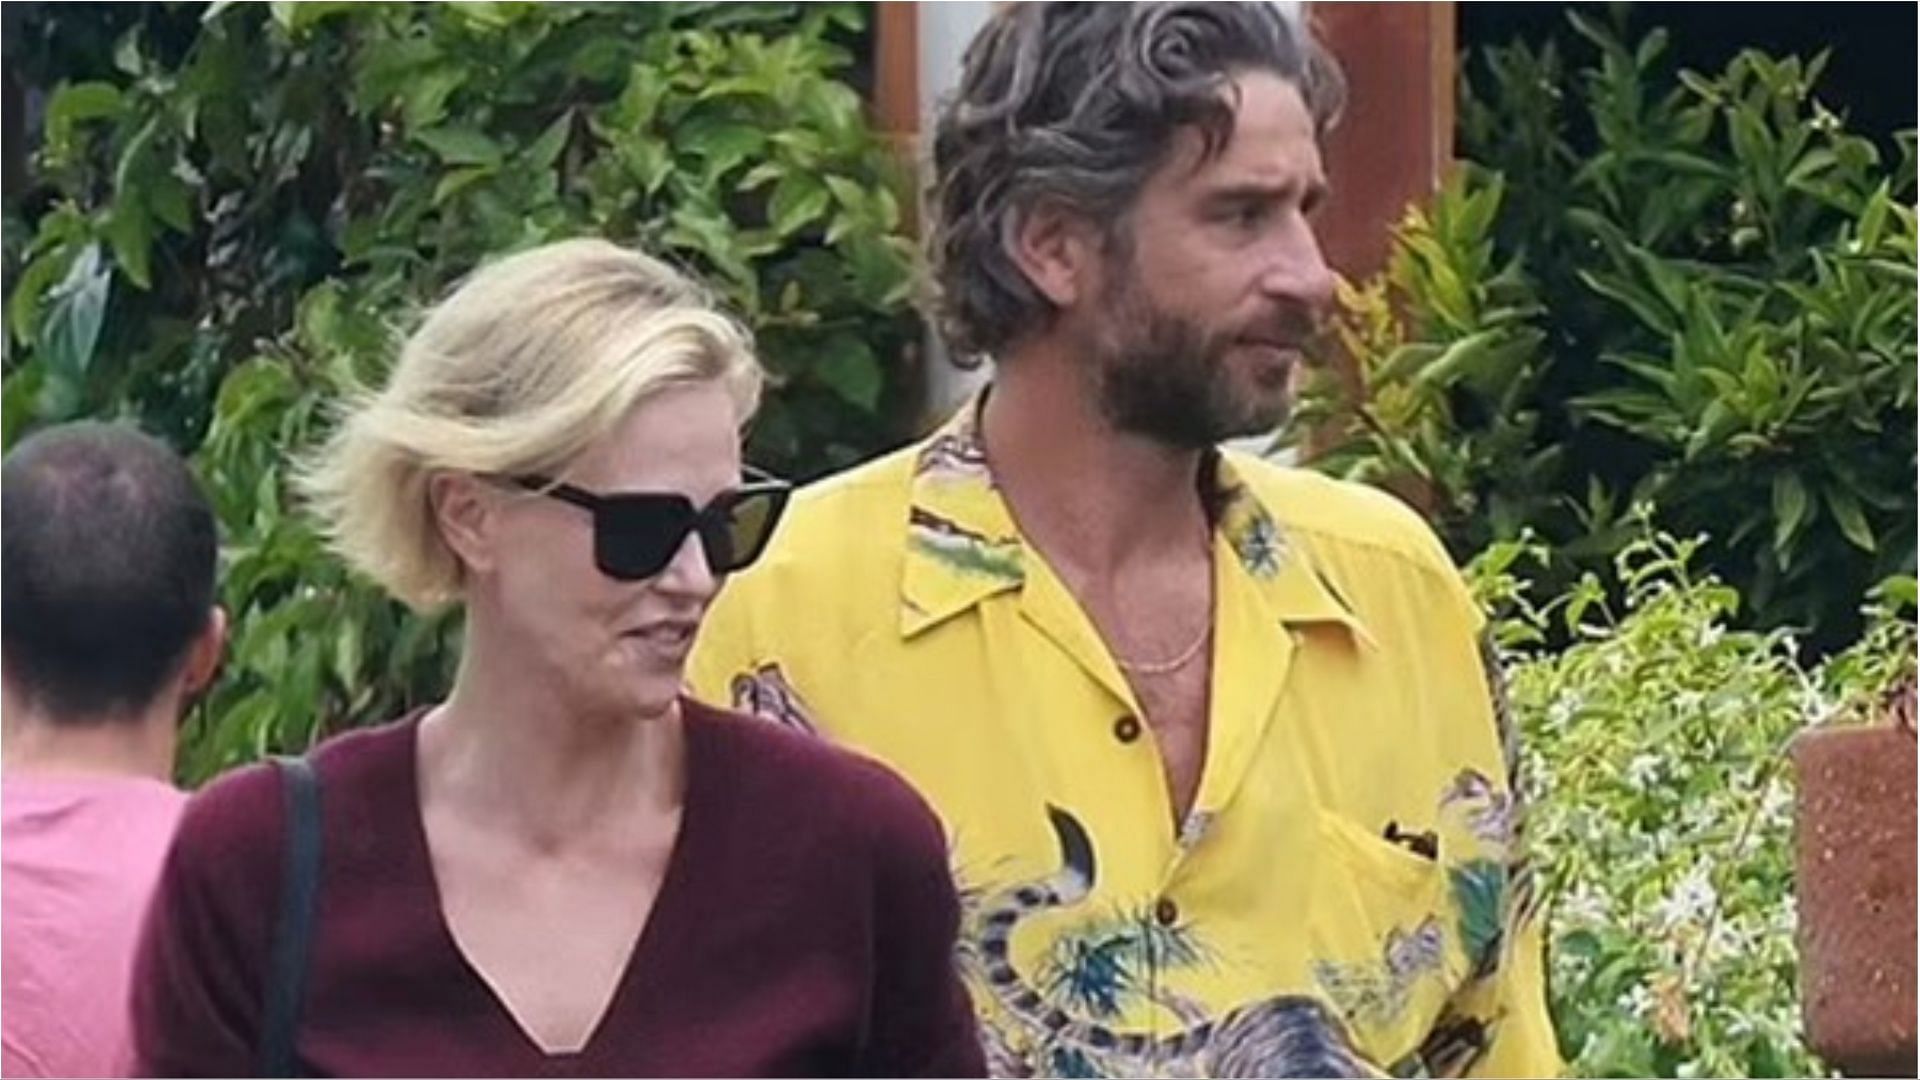 Charlize Theron and Alex Dimitrijevic were spotted holding hands (Image via Lorraine C Broughton/Facebook)